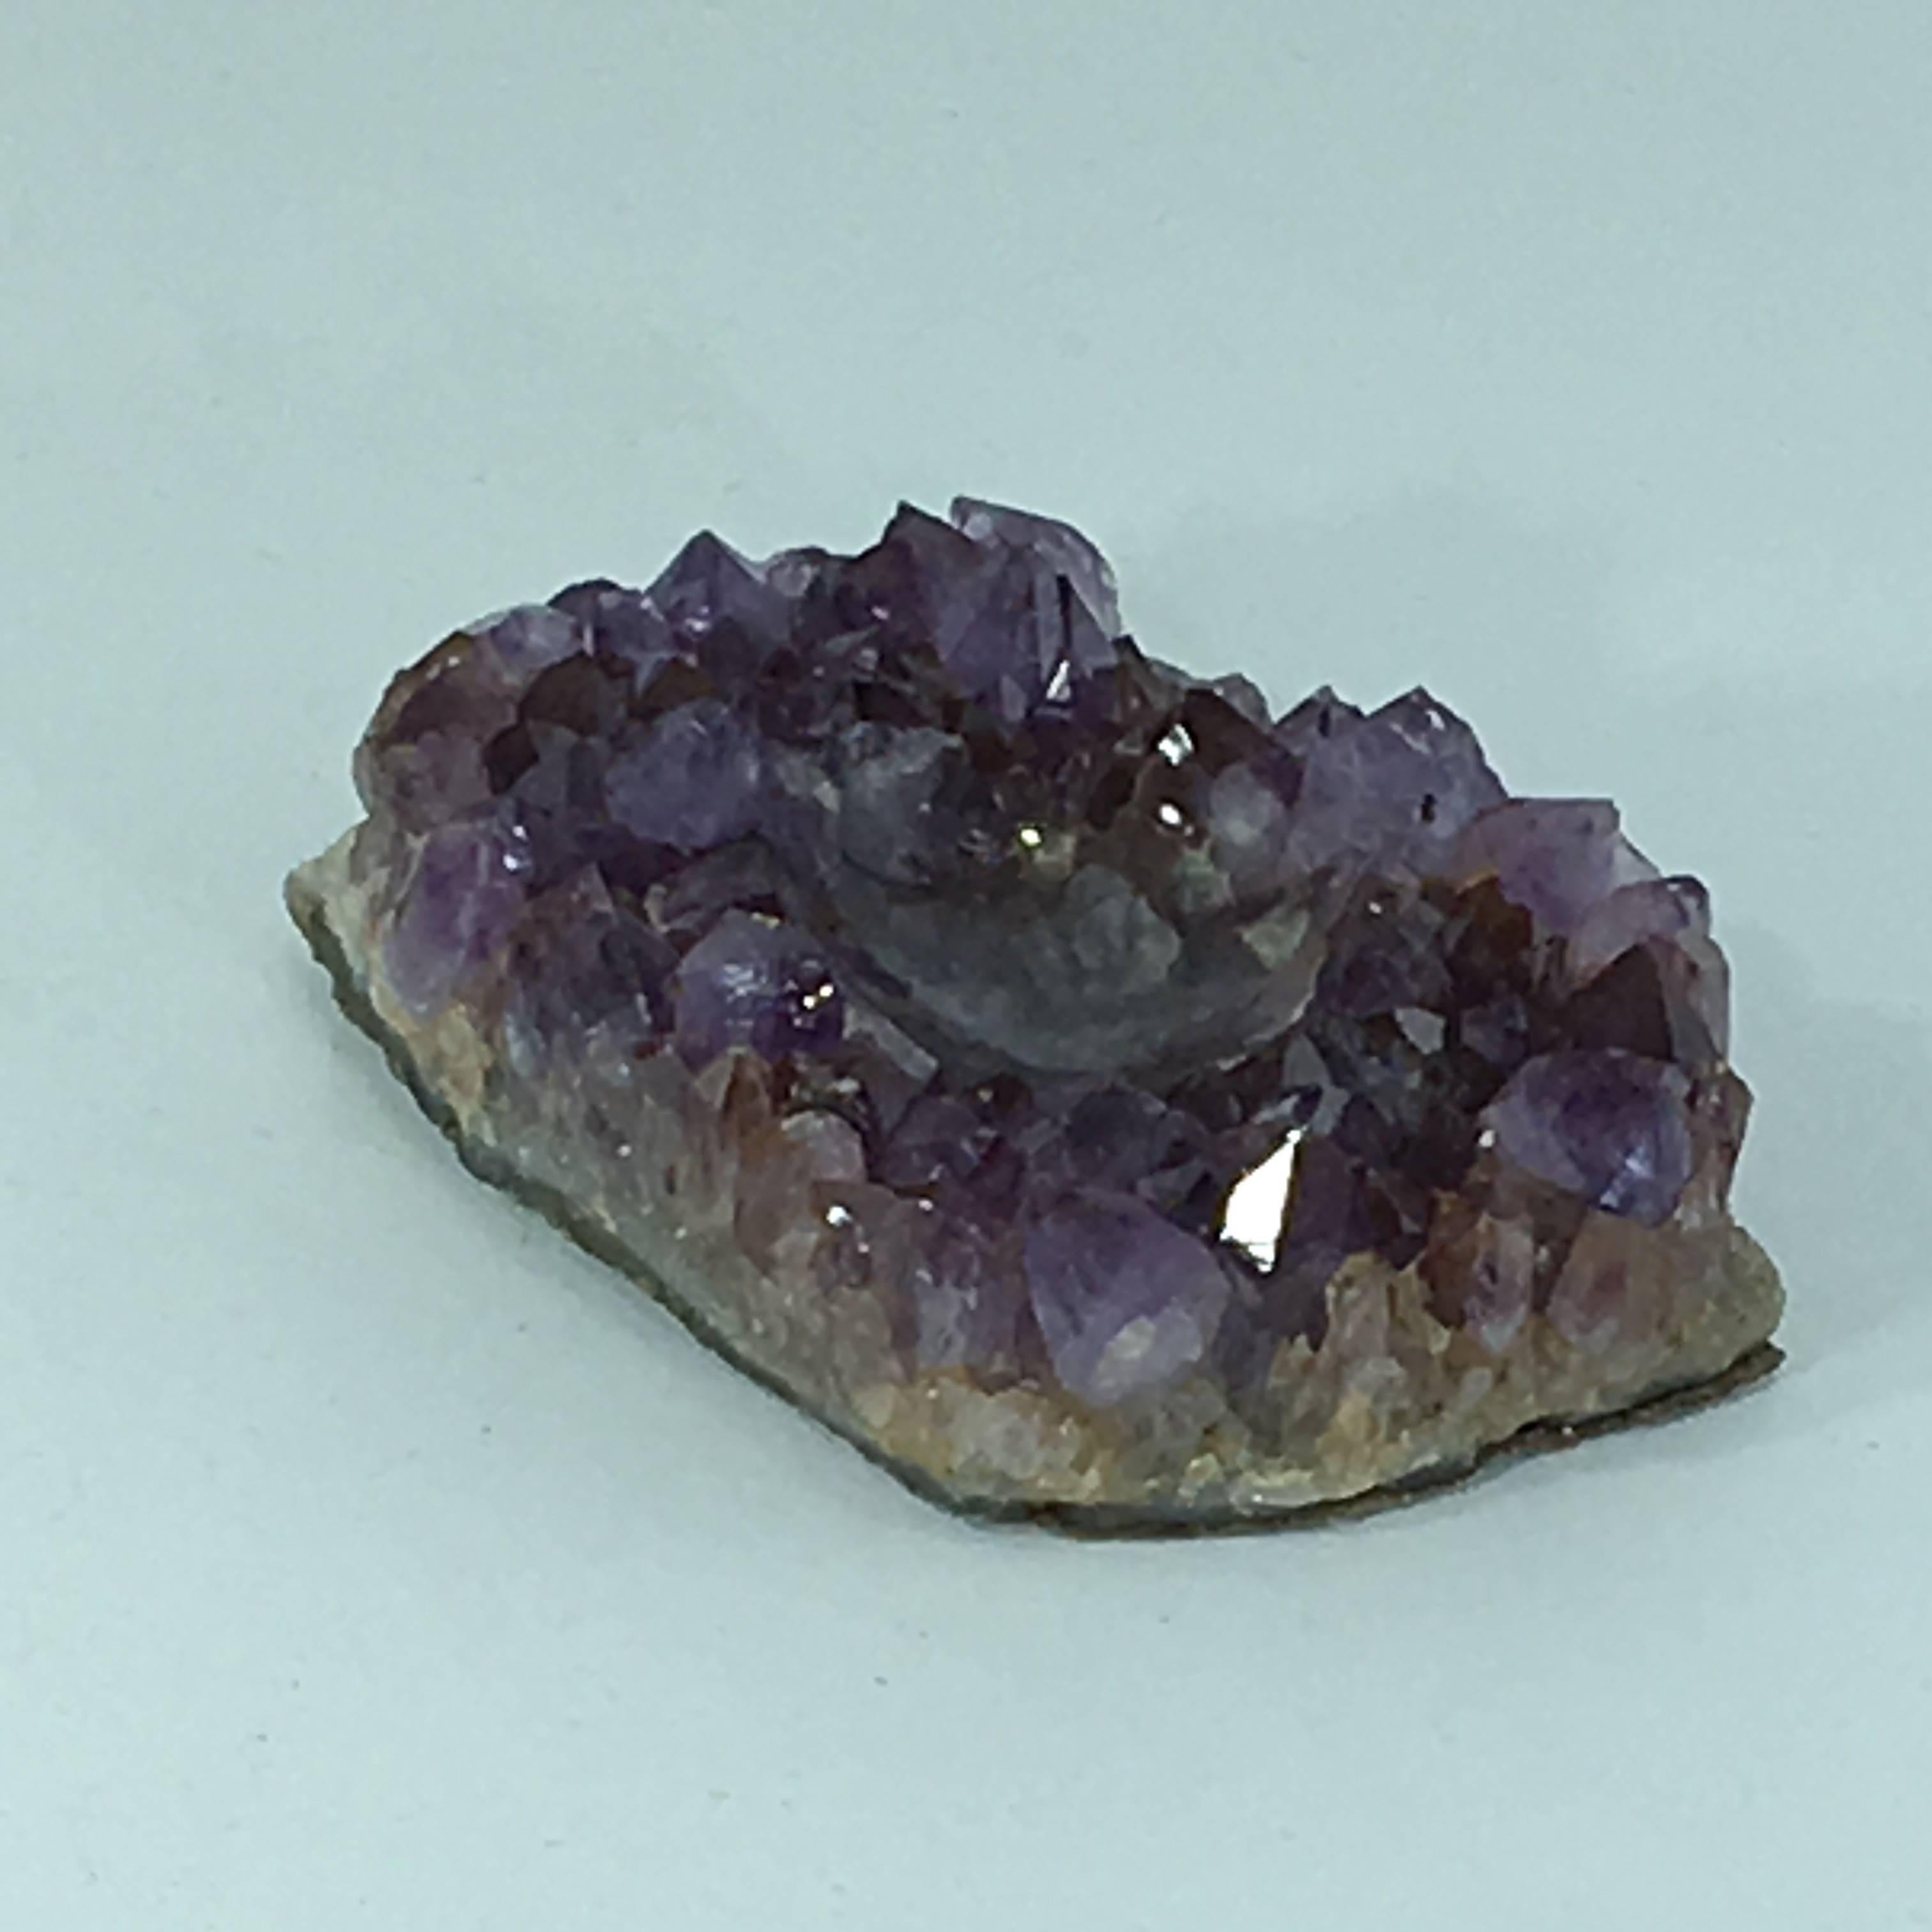 Midcentury Amethyst Ashtray from Zambie with Medium Size and Purple Color 1